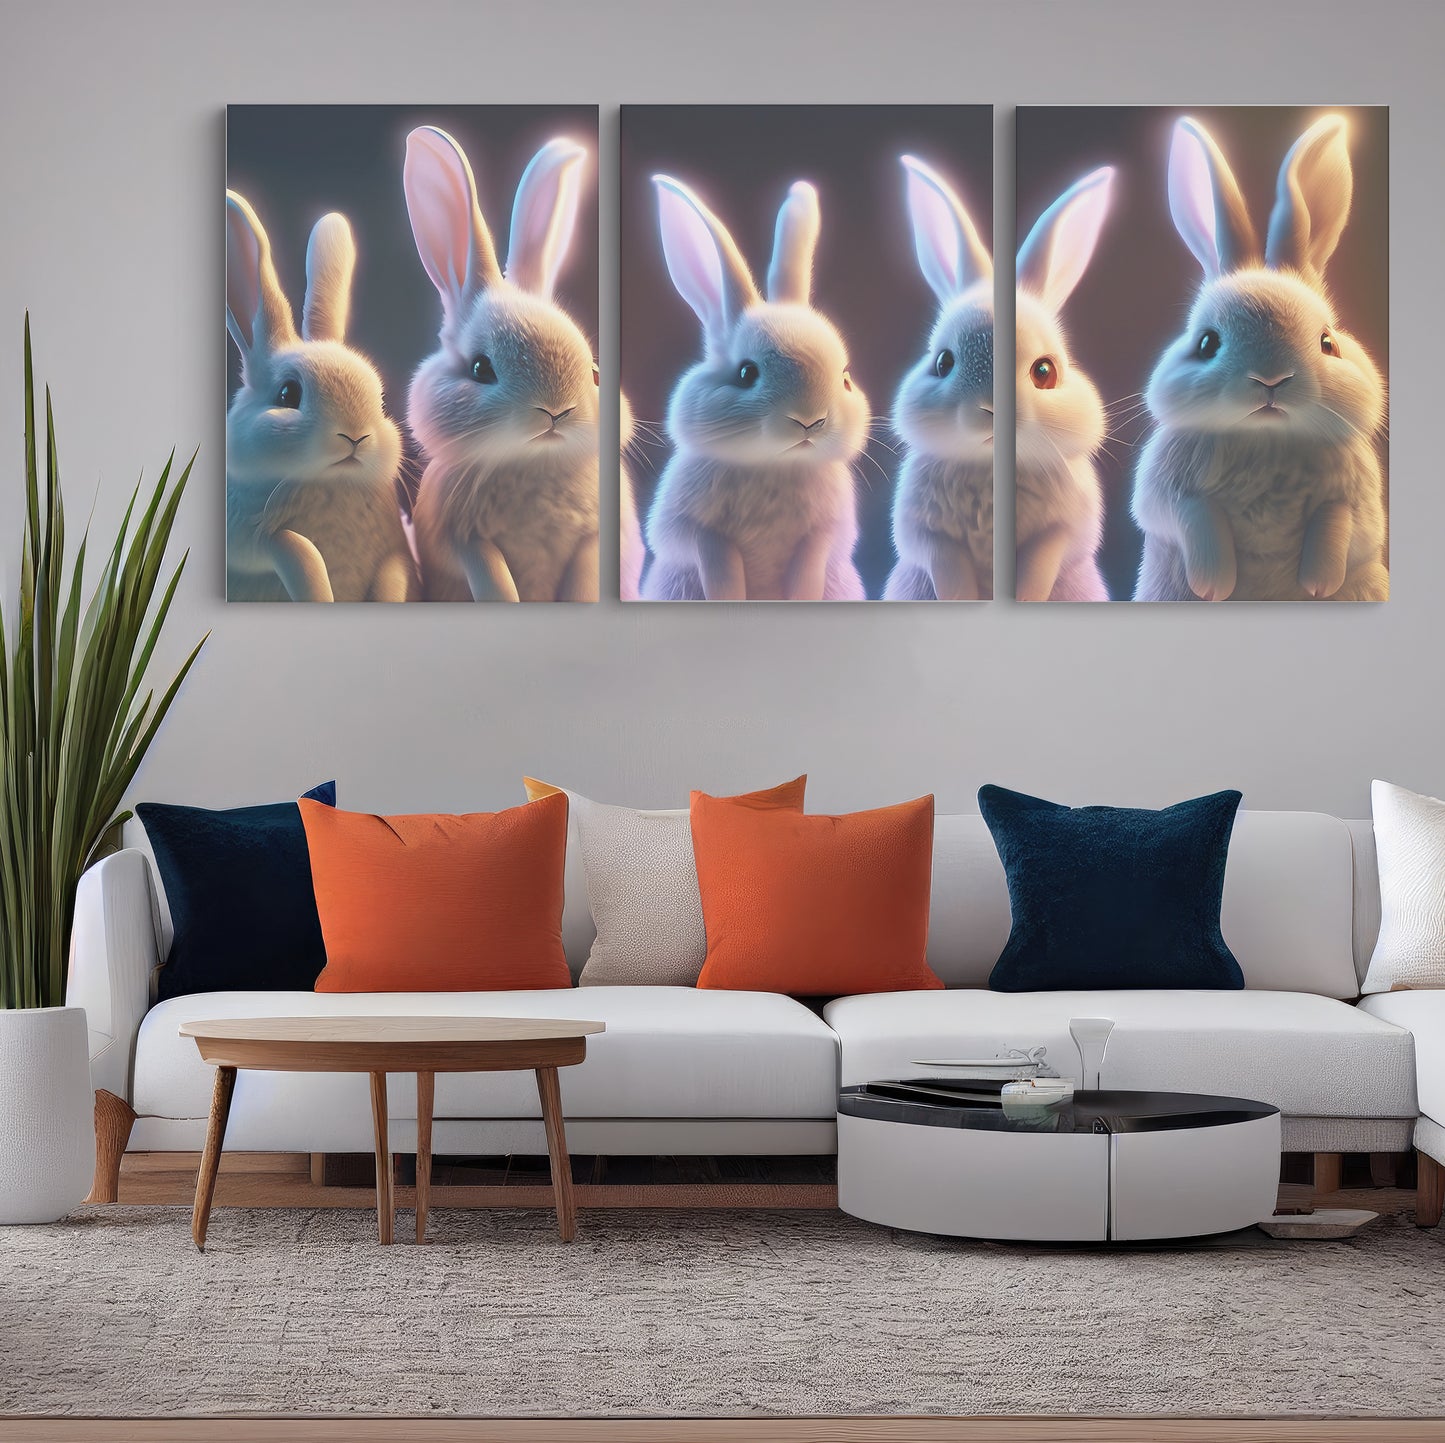 Graceful Hoppers: A Captivating Wall Art Celebrating the Elegance and Playfulness of Rabbits - S06E05